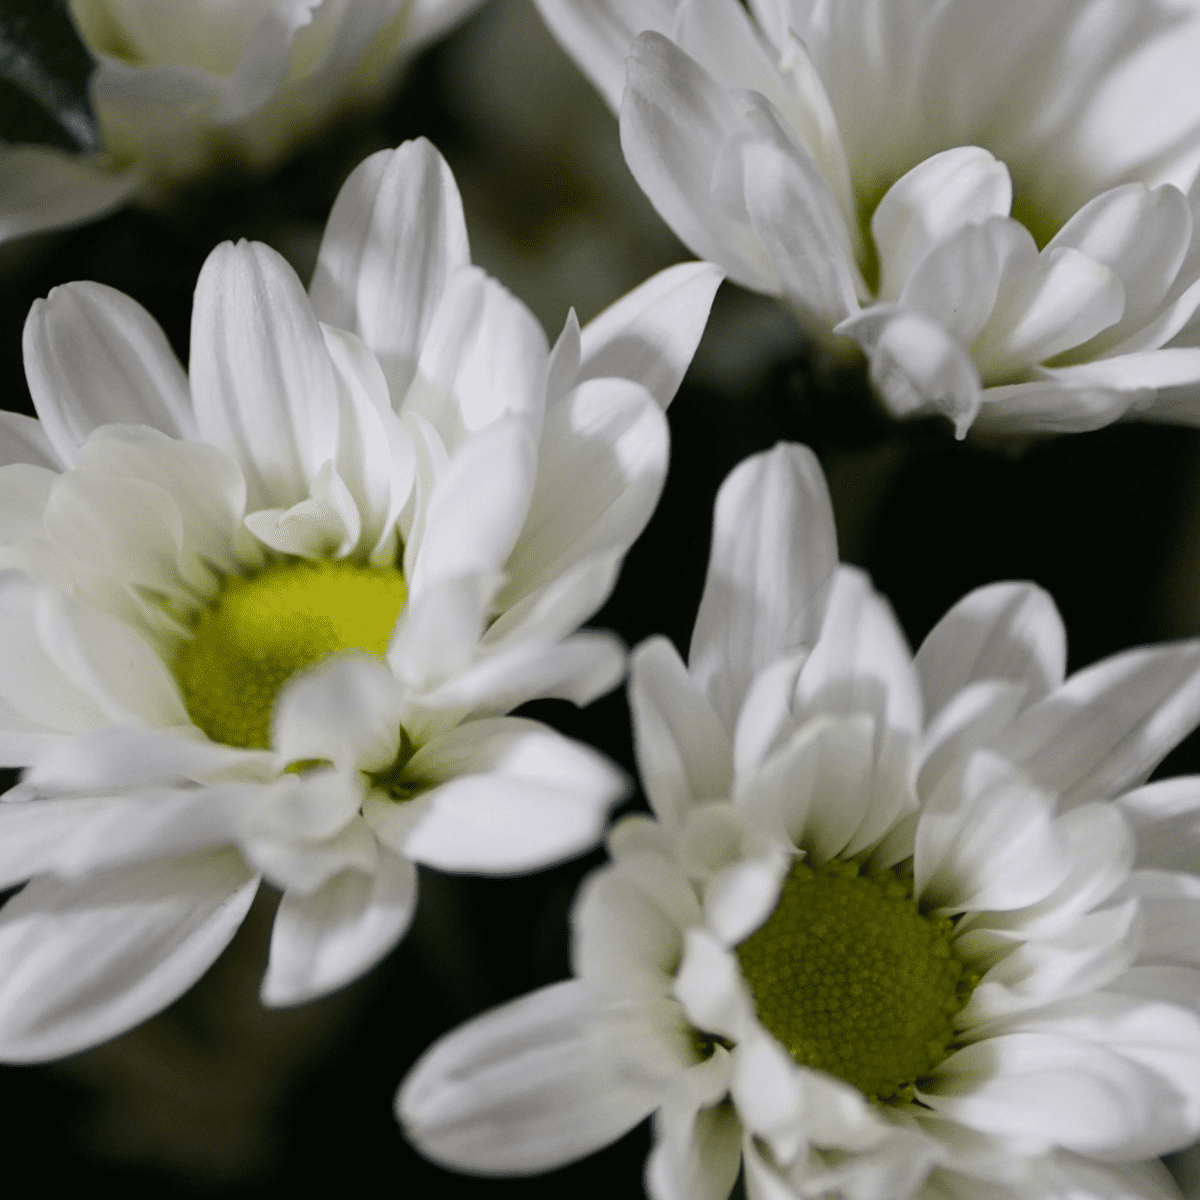 5 Fascinating Facts About Daisies That Will Make You Smile